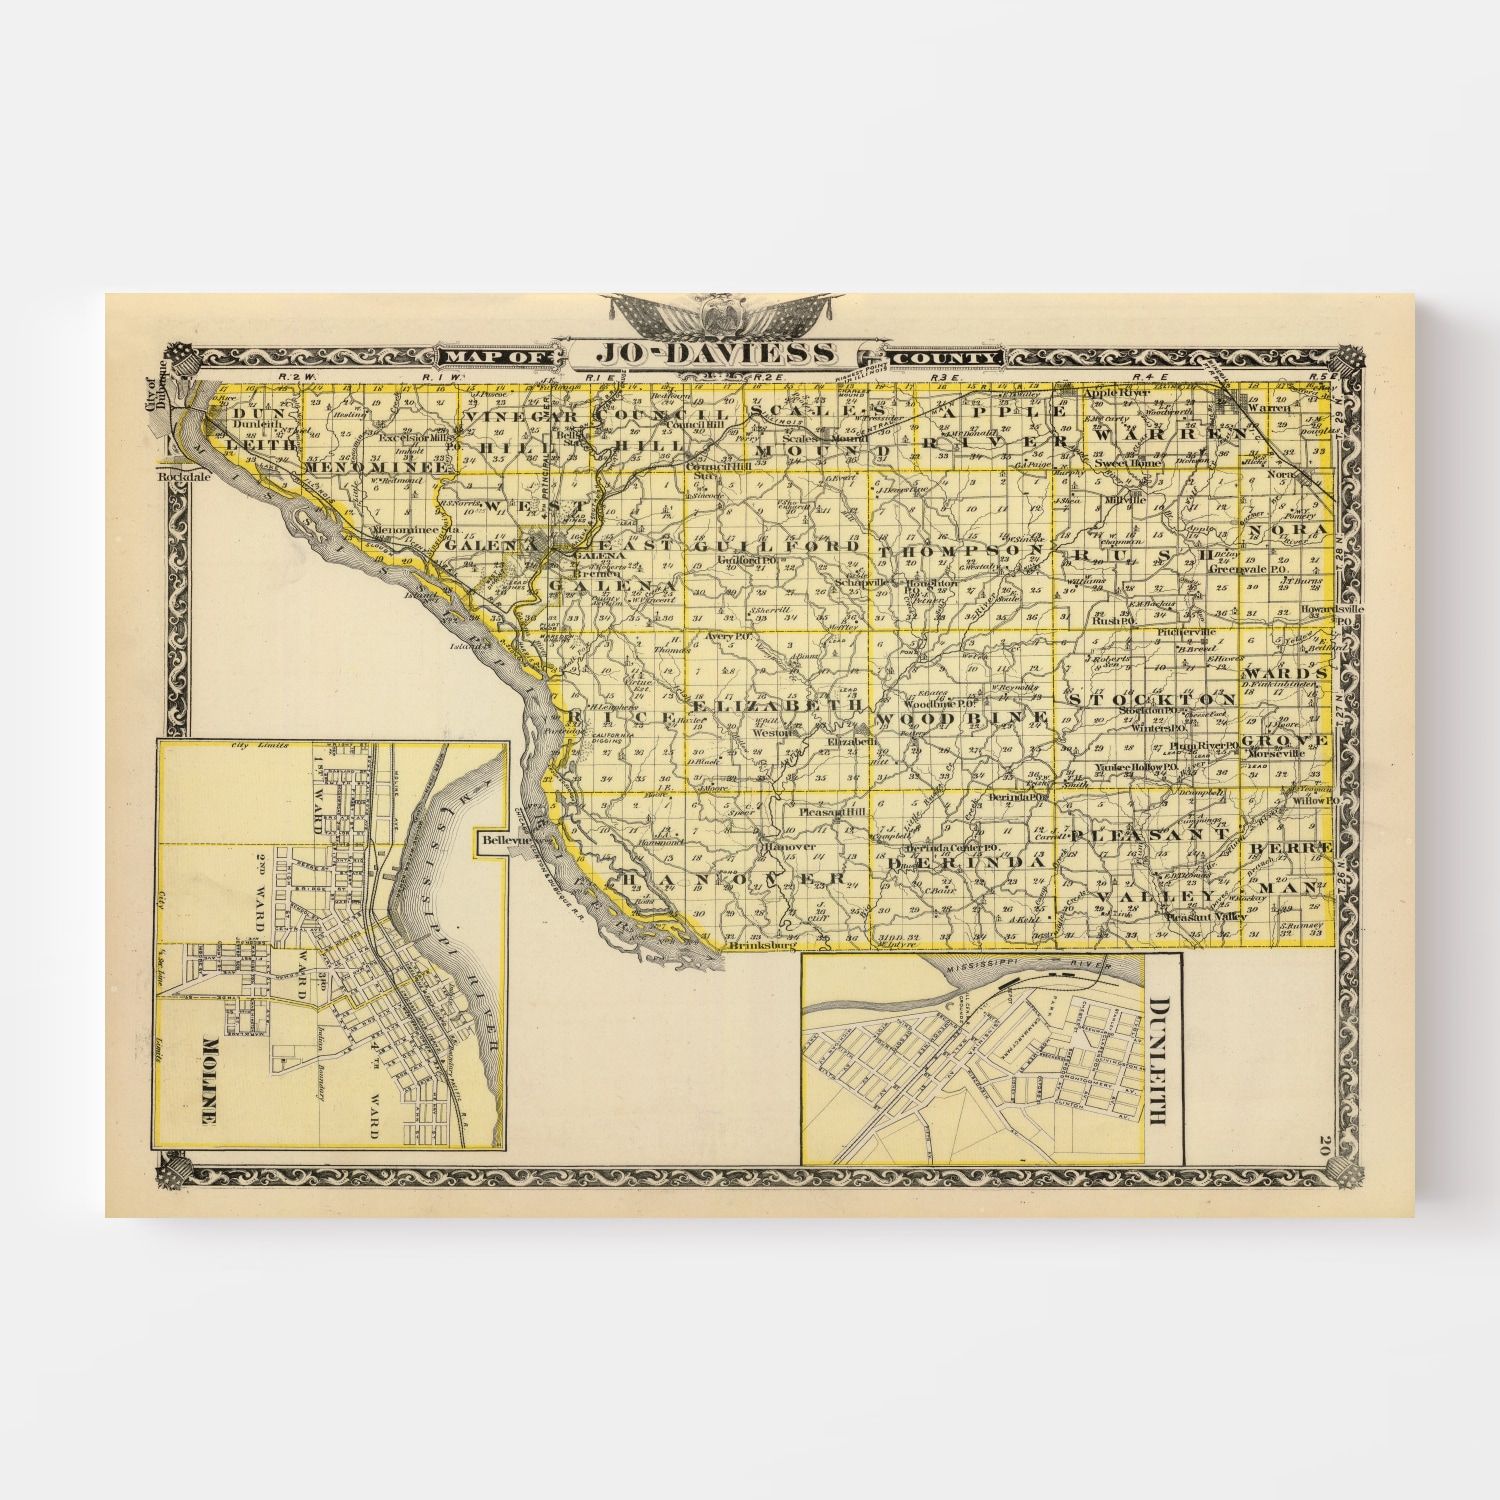 Vintage Map Of Jo Daviess County Illinois 1876 By Teds Vintage Art 8840